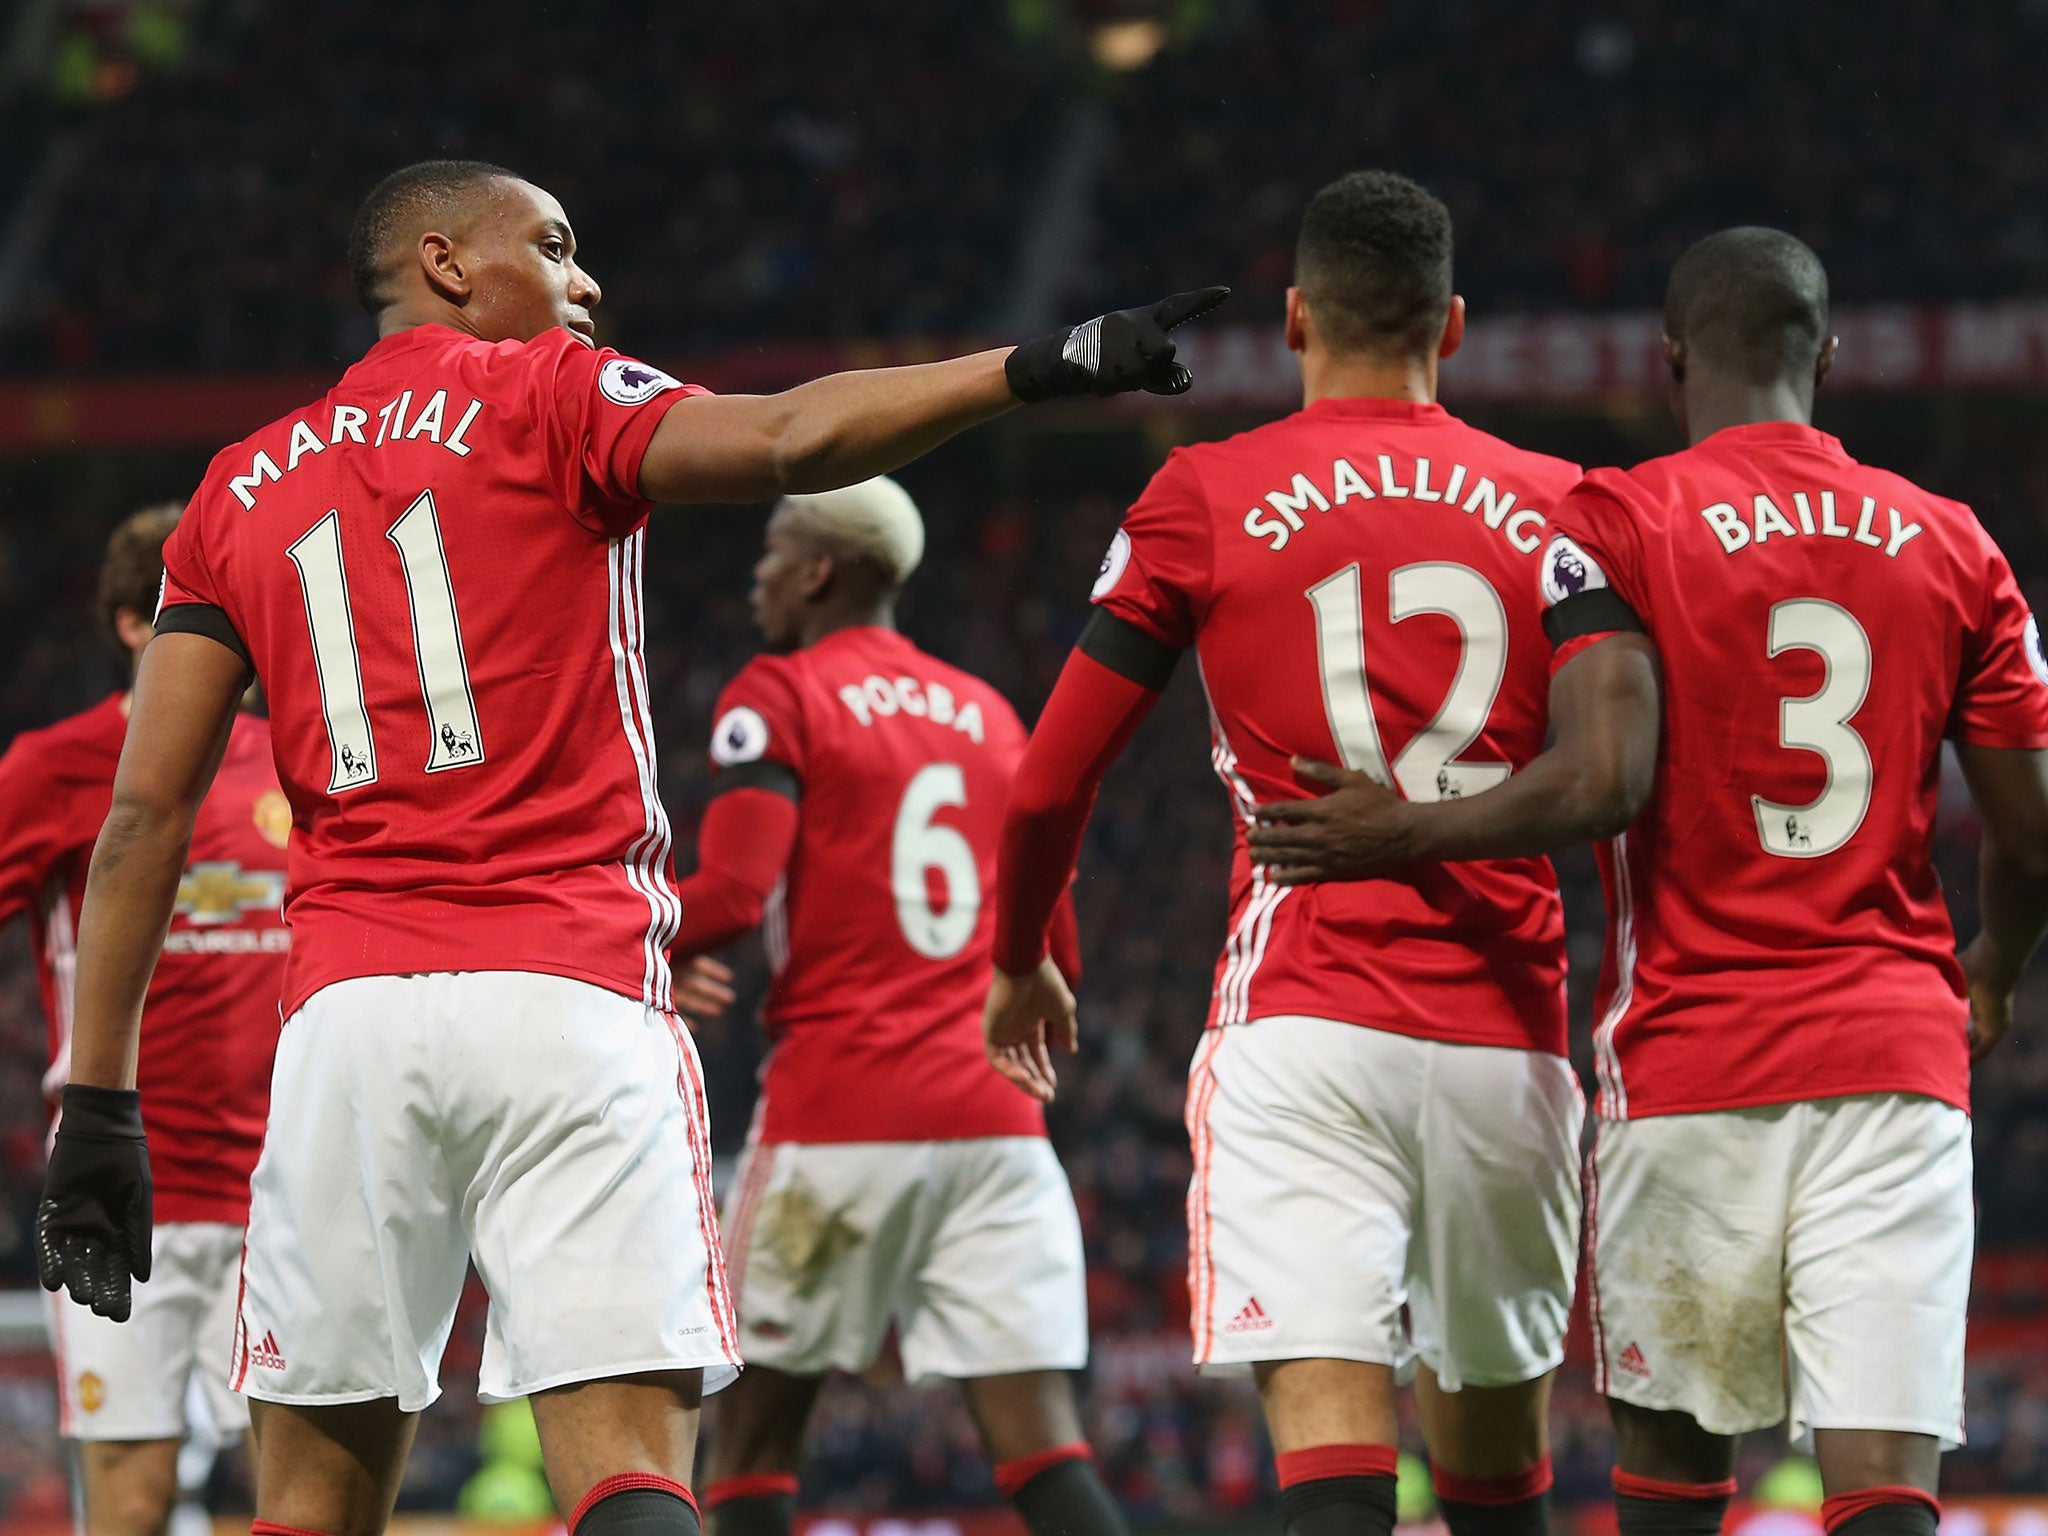 United are in high spirits as they continue to chase down a spot in the top four